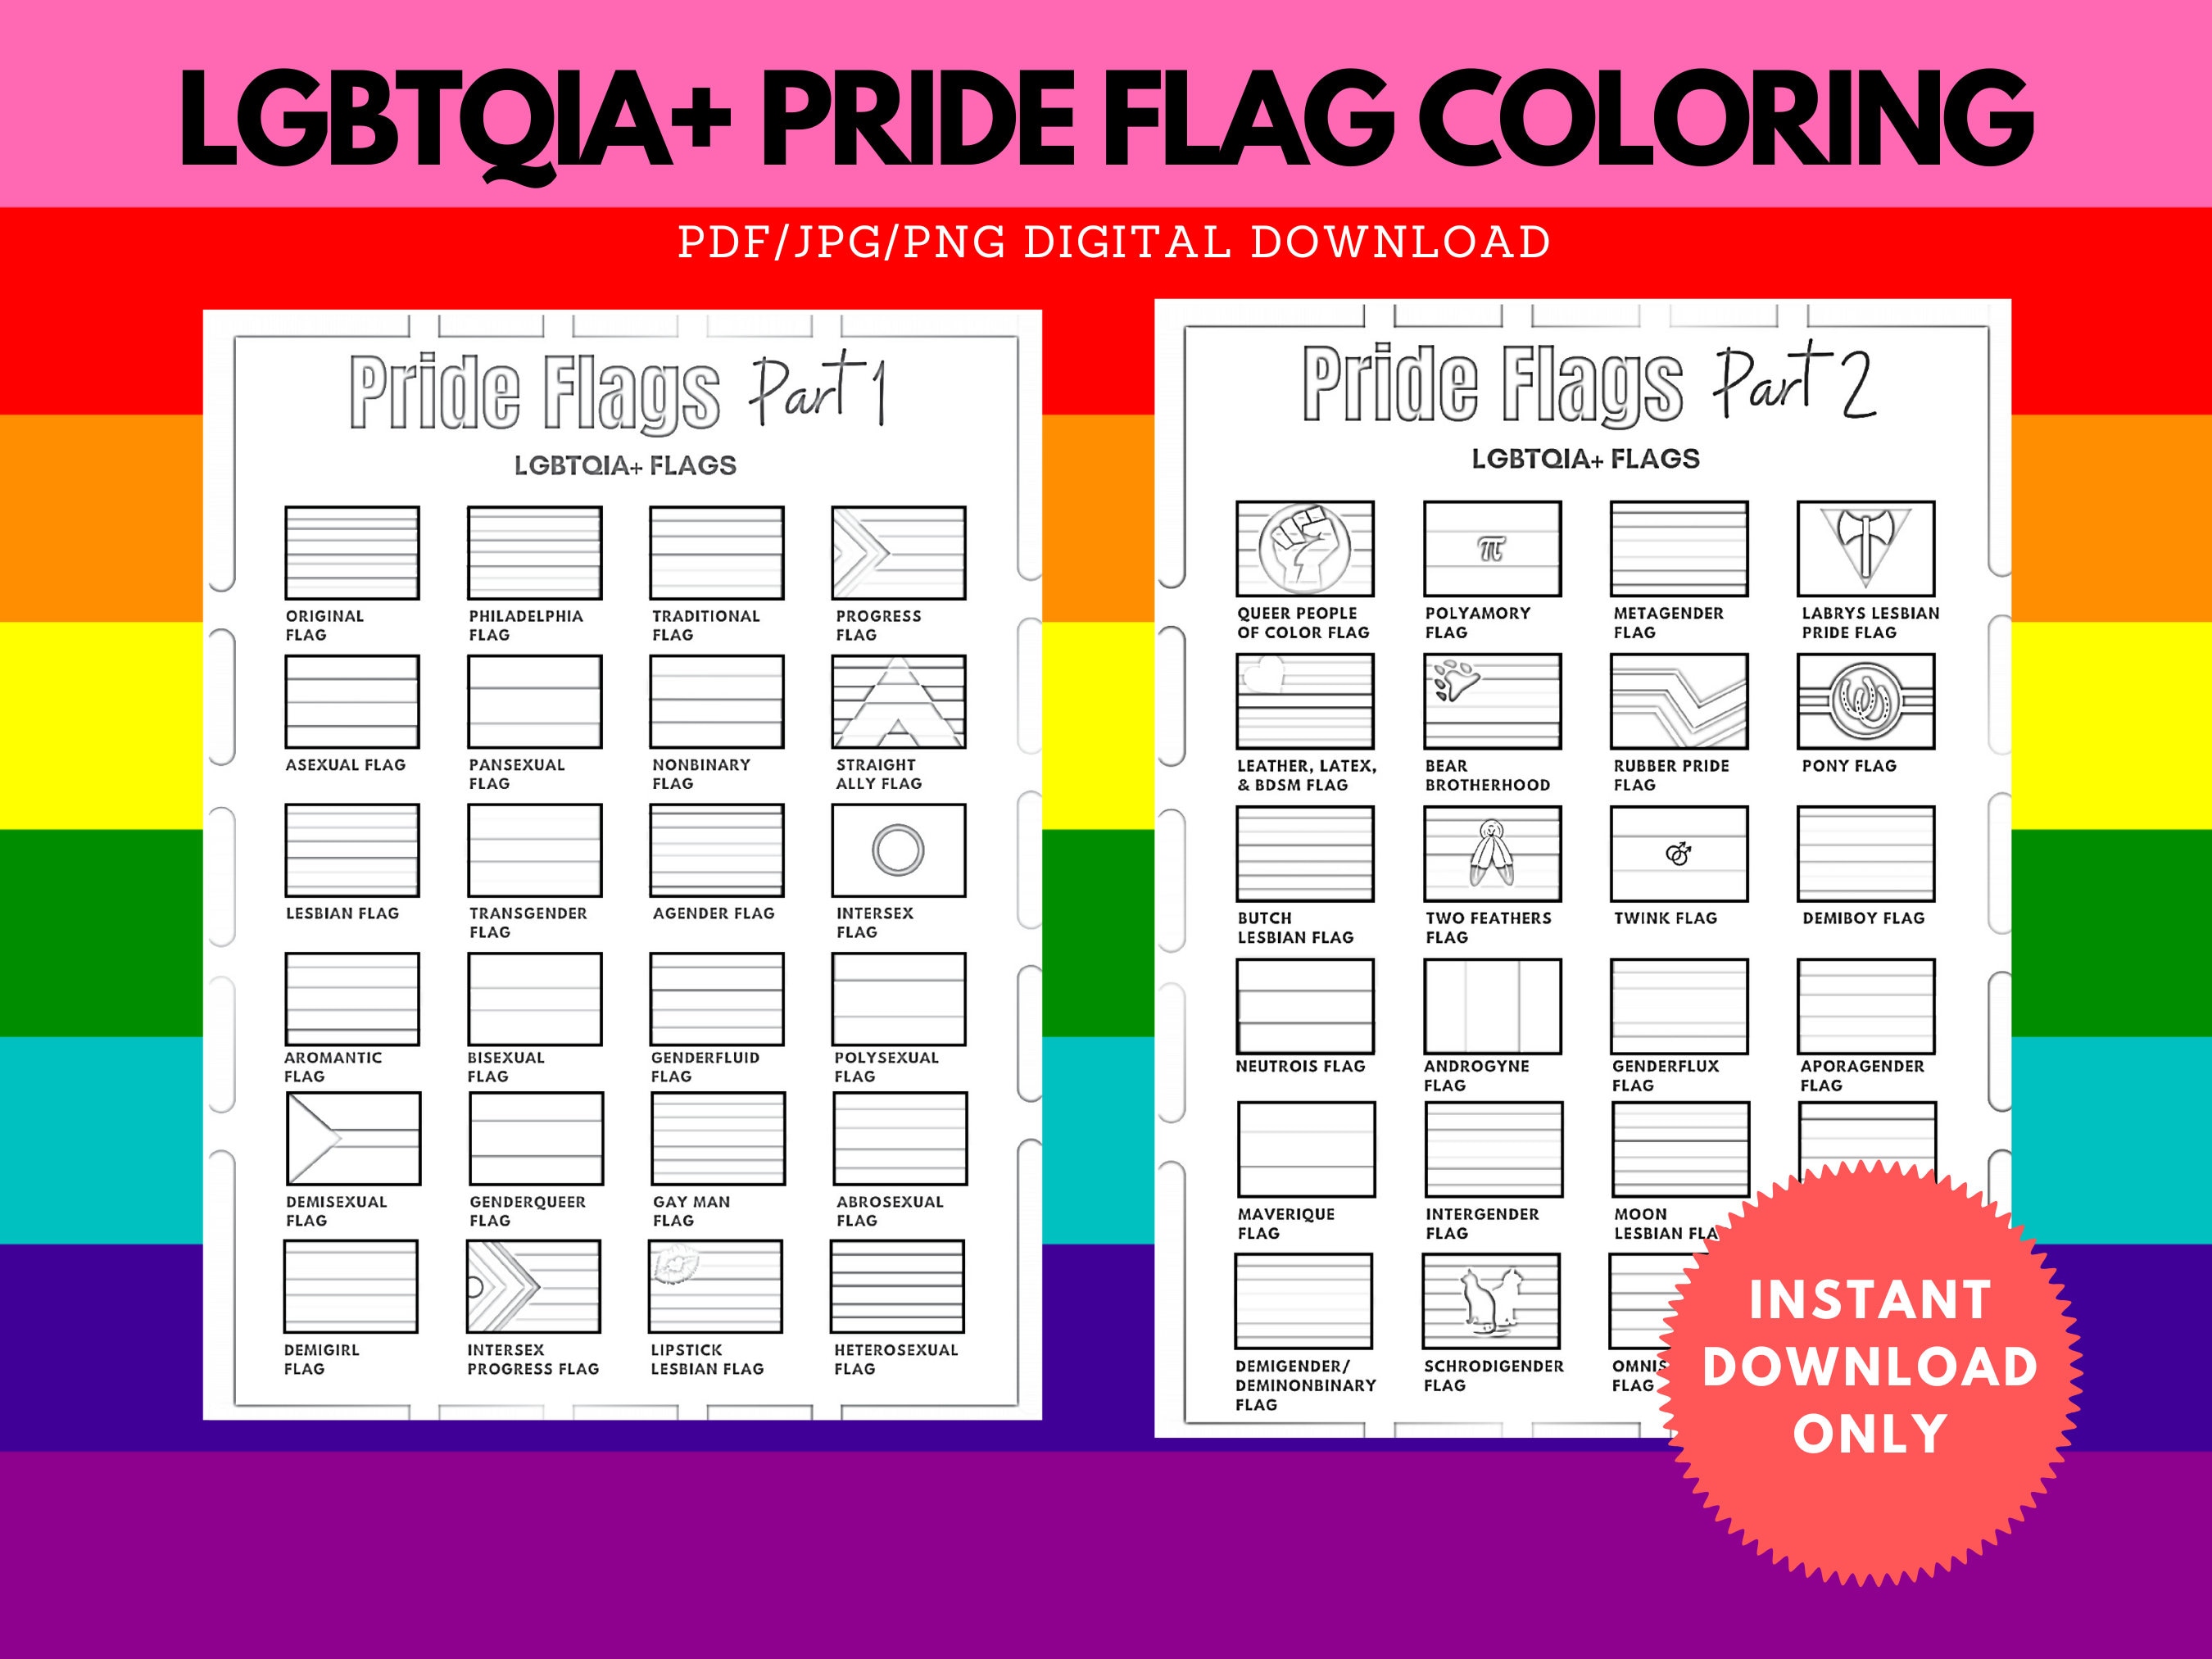 Lgbtqia pride flags coloring pages education printable lgbtq flag lgbt gift instant download files download now